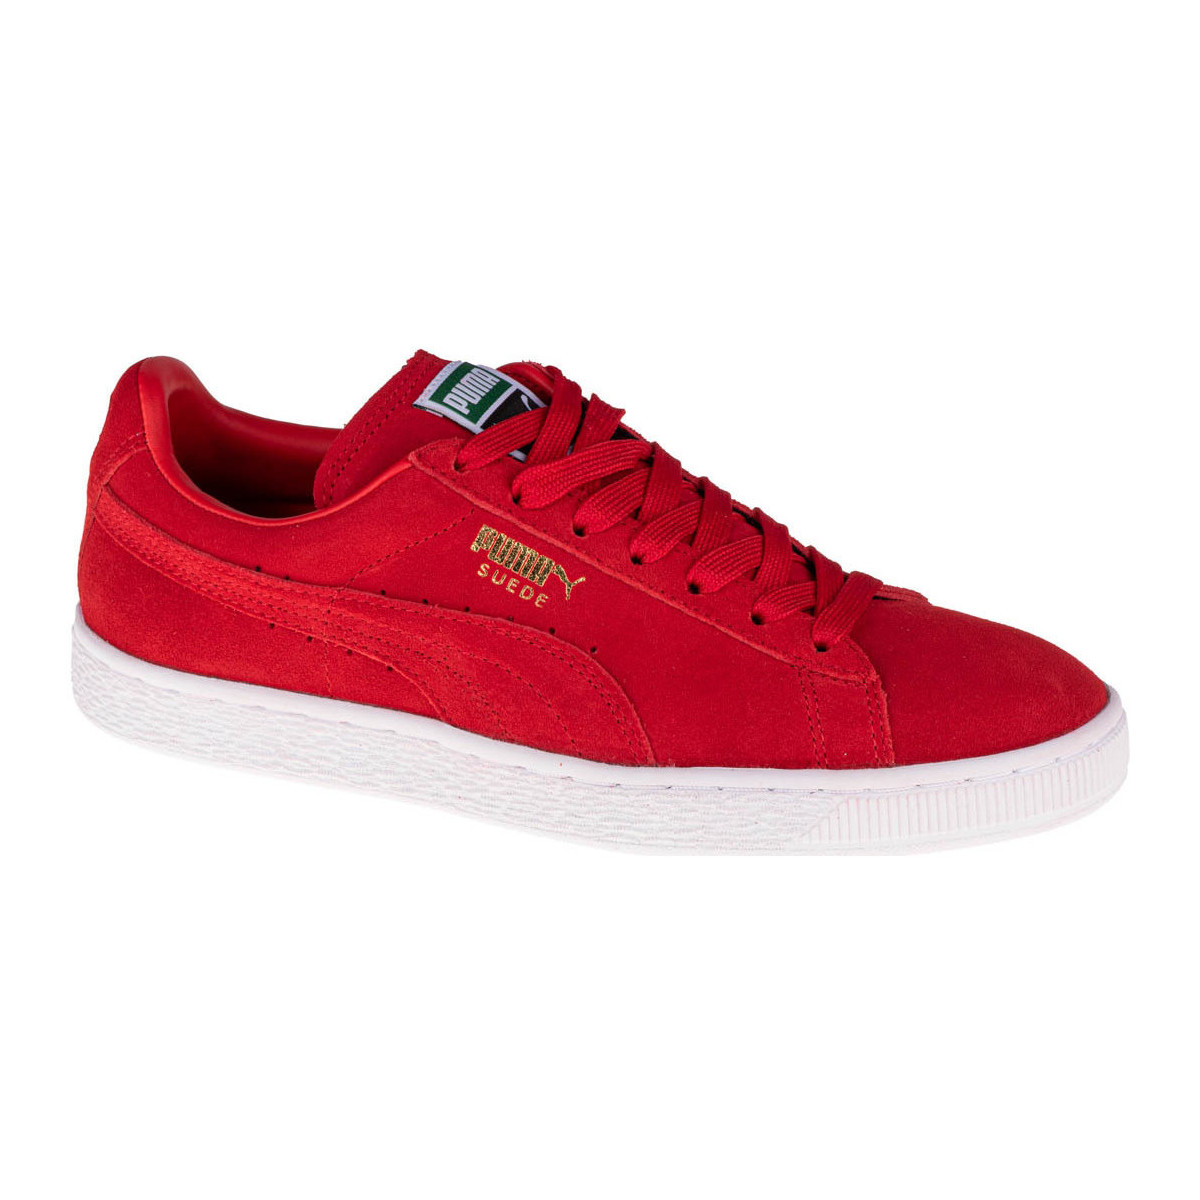 Chaussures Baskets basses Puma Suede Classic Rouge